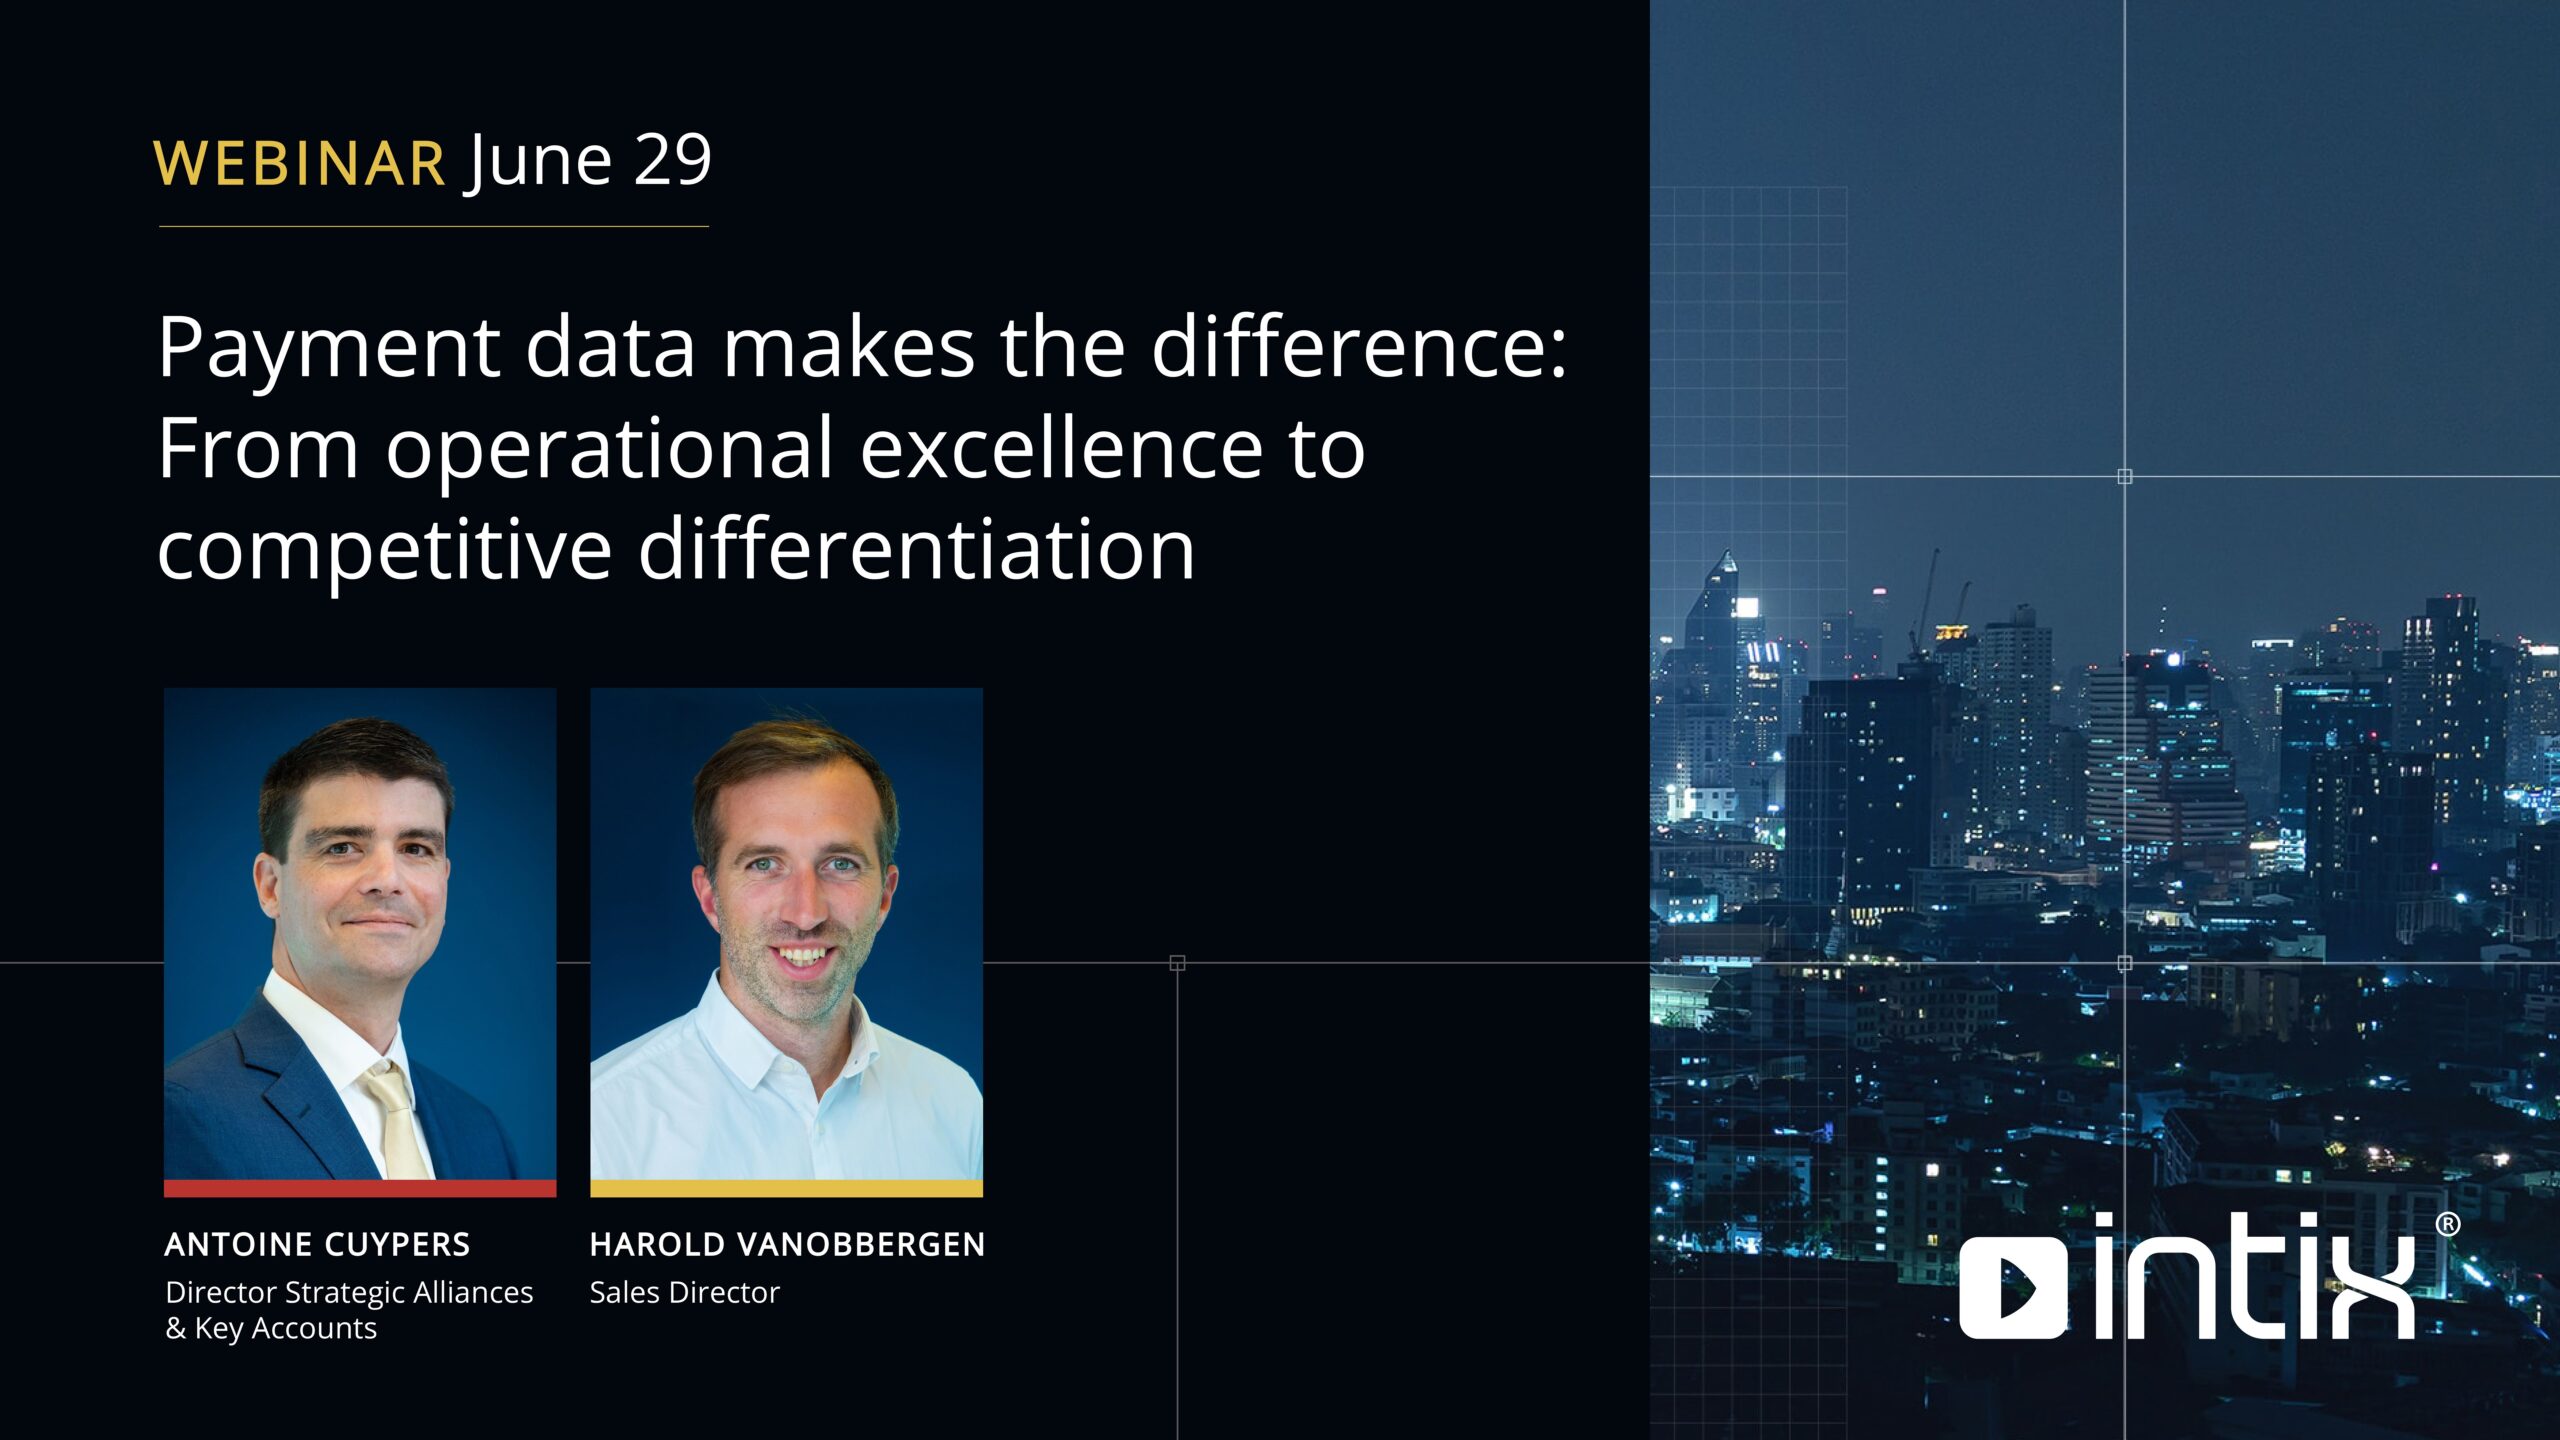 Payment data makes the difference from operational excellence to competitive differentiation.